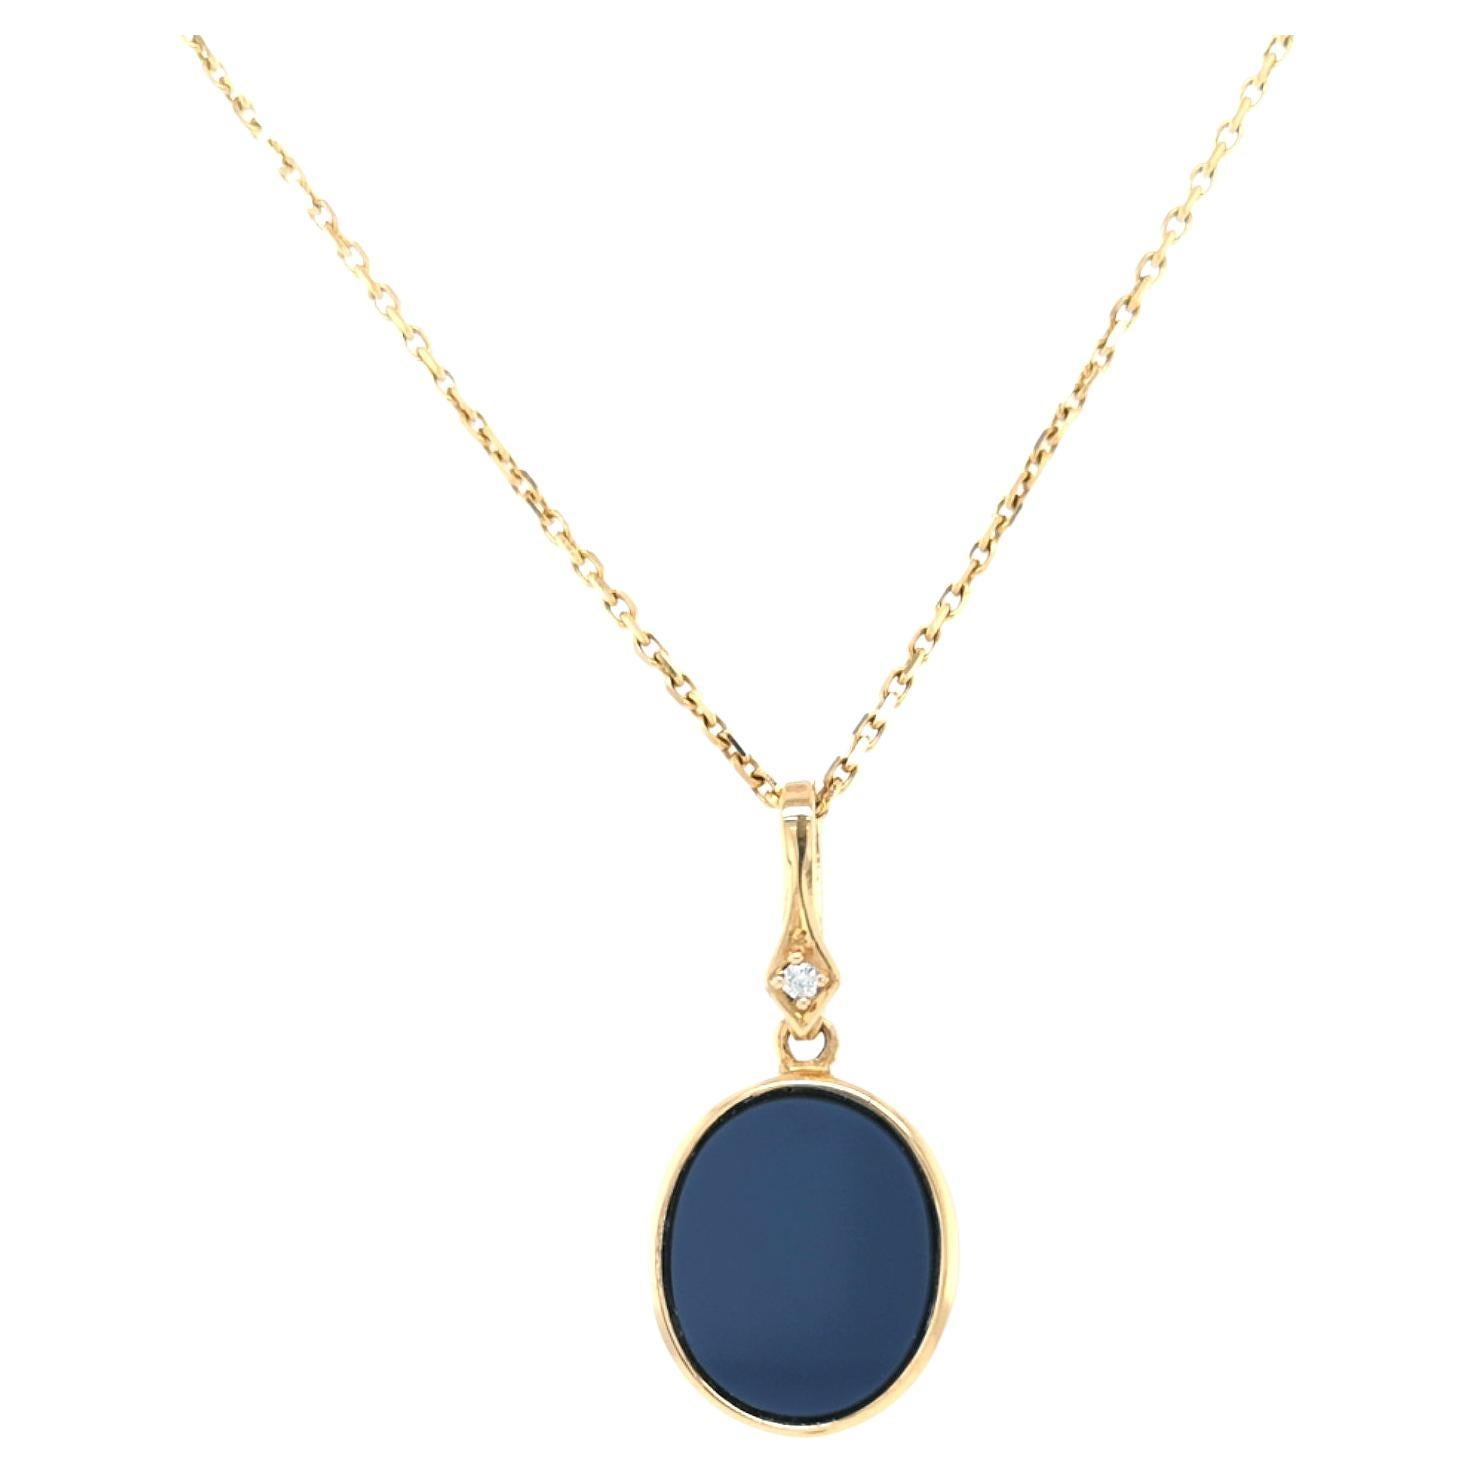 Oval Pendant Necklace 18k Yellow Gold 1 Diamond 0.02 ct G VS Blue Layered Onyx For Sale